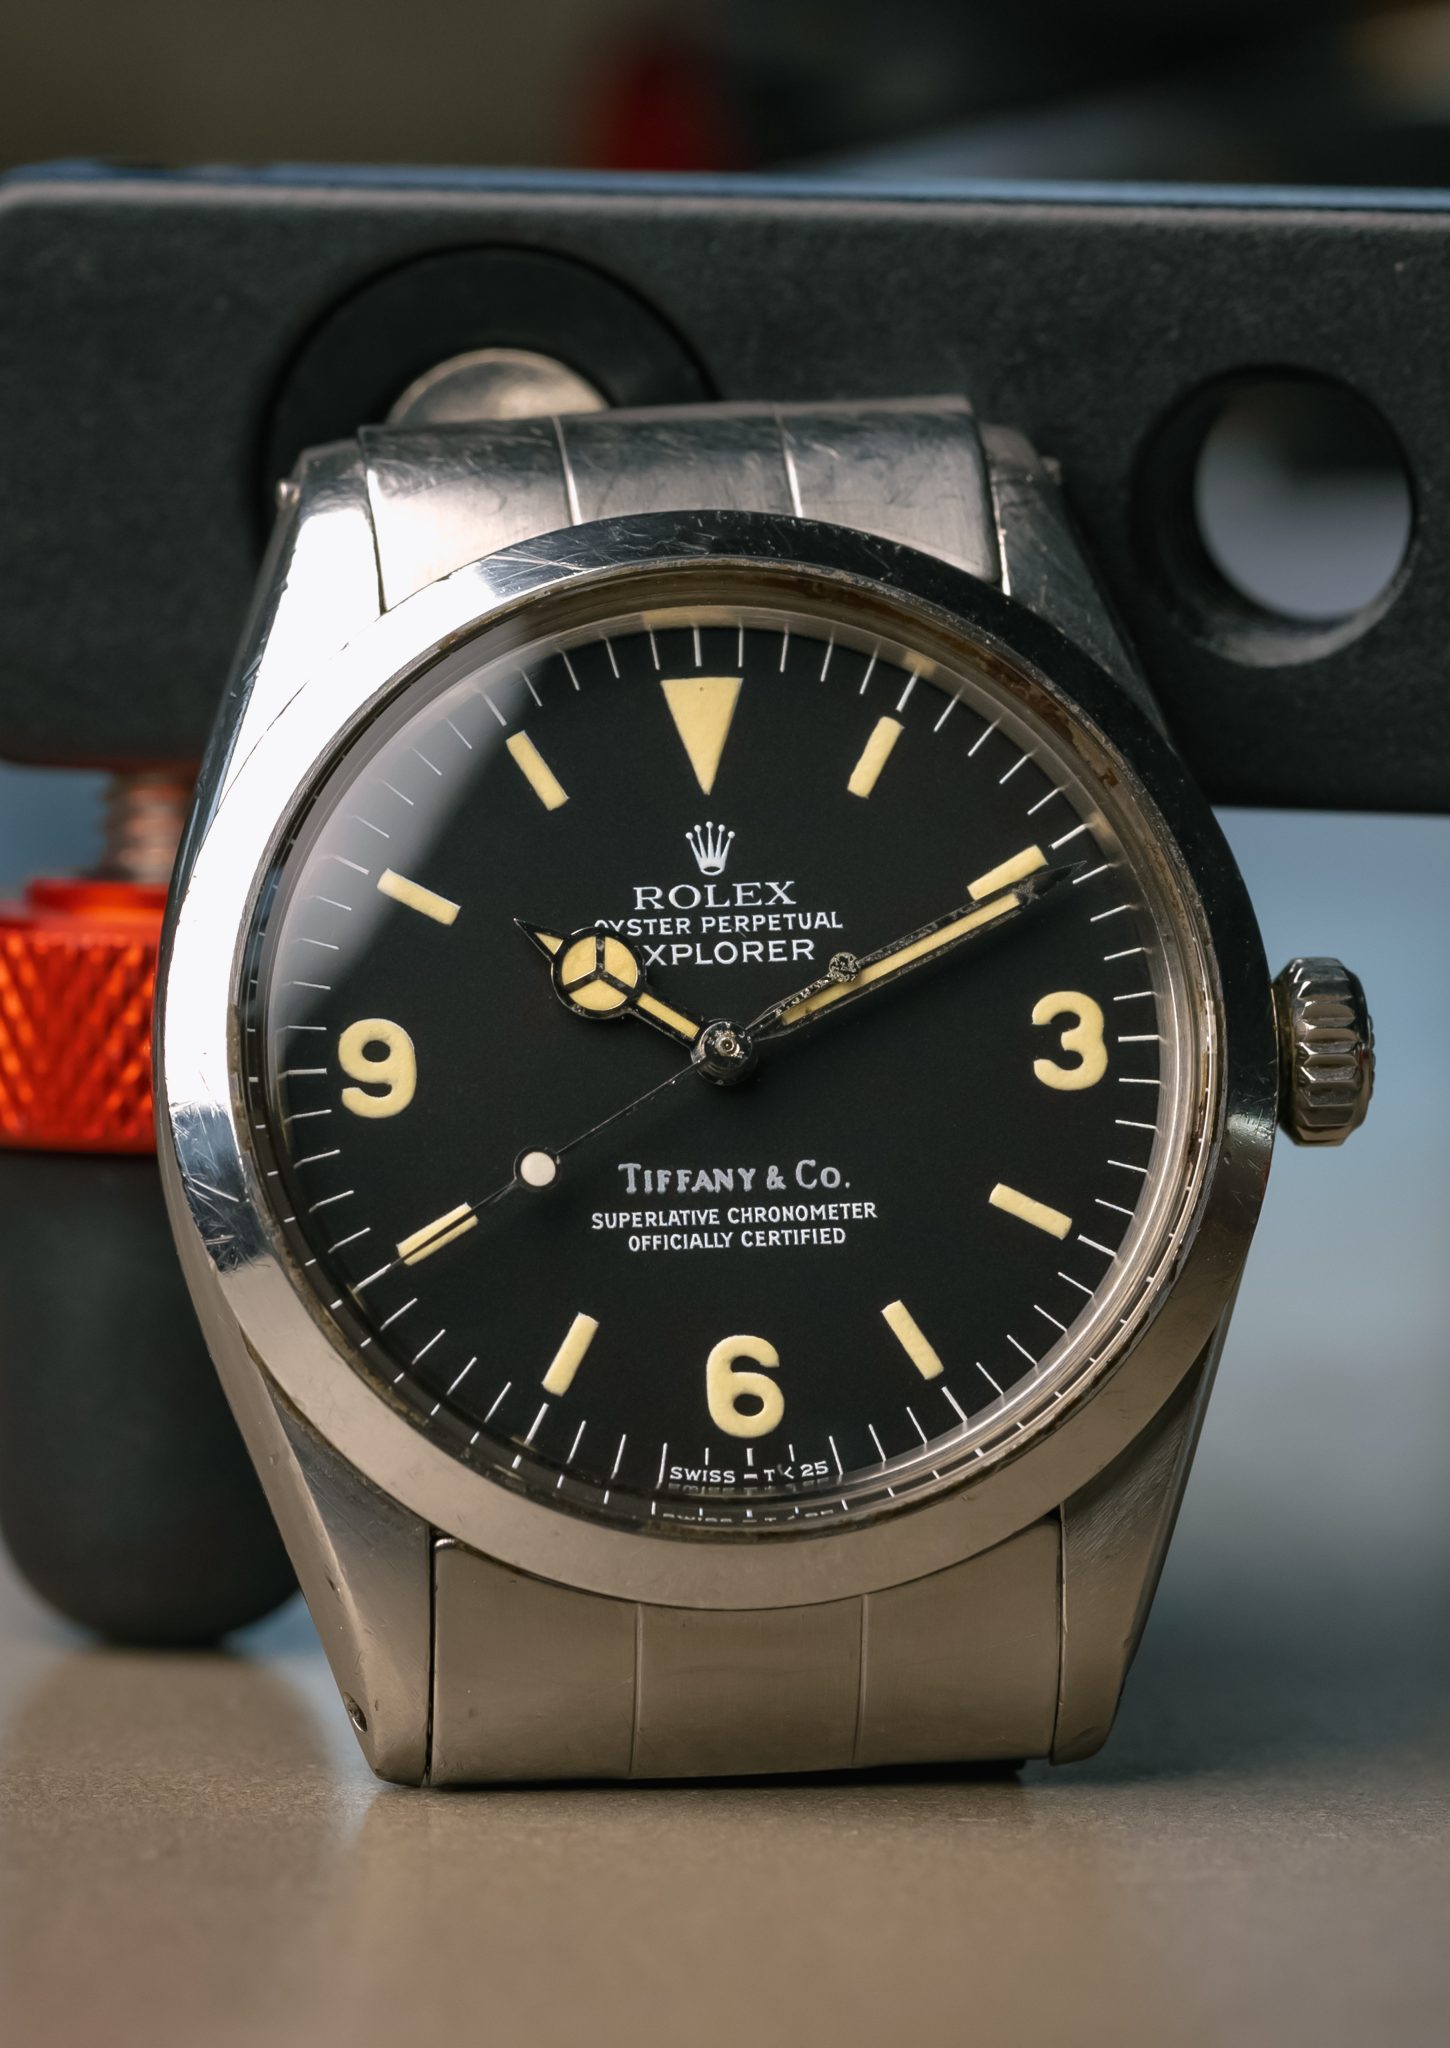 Review: Rolex 1016 Explorer - an Overshadowed Classic - YouTube